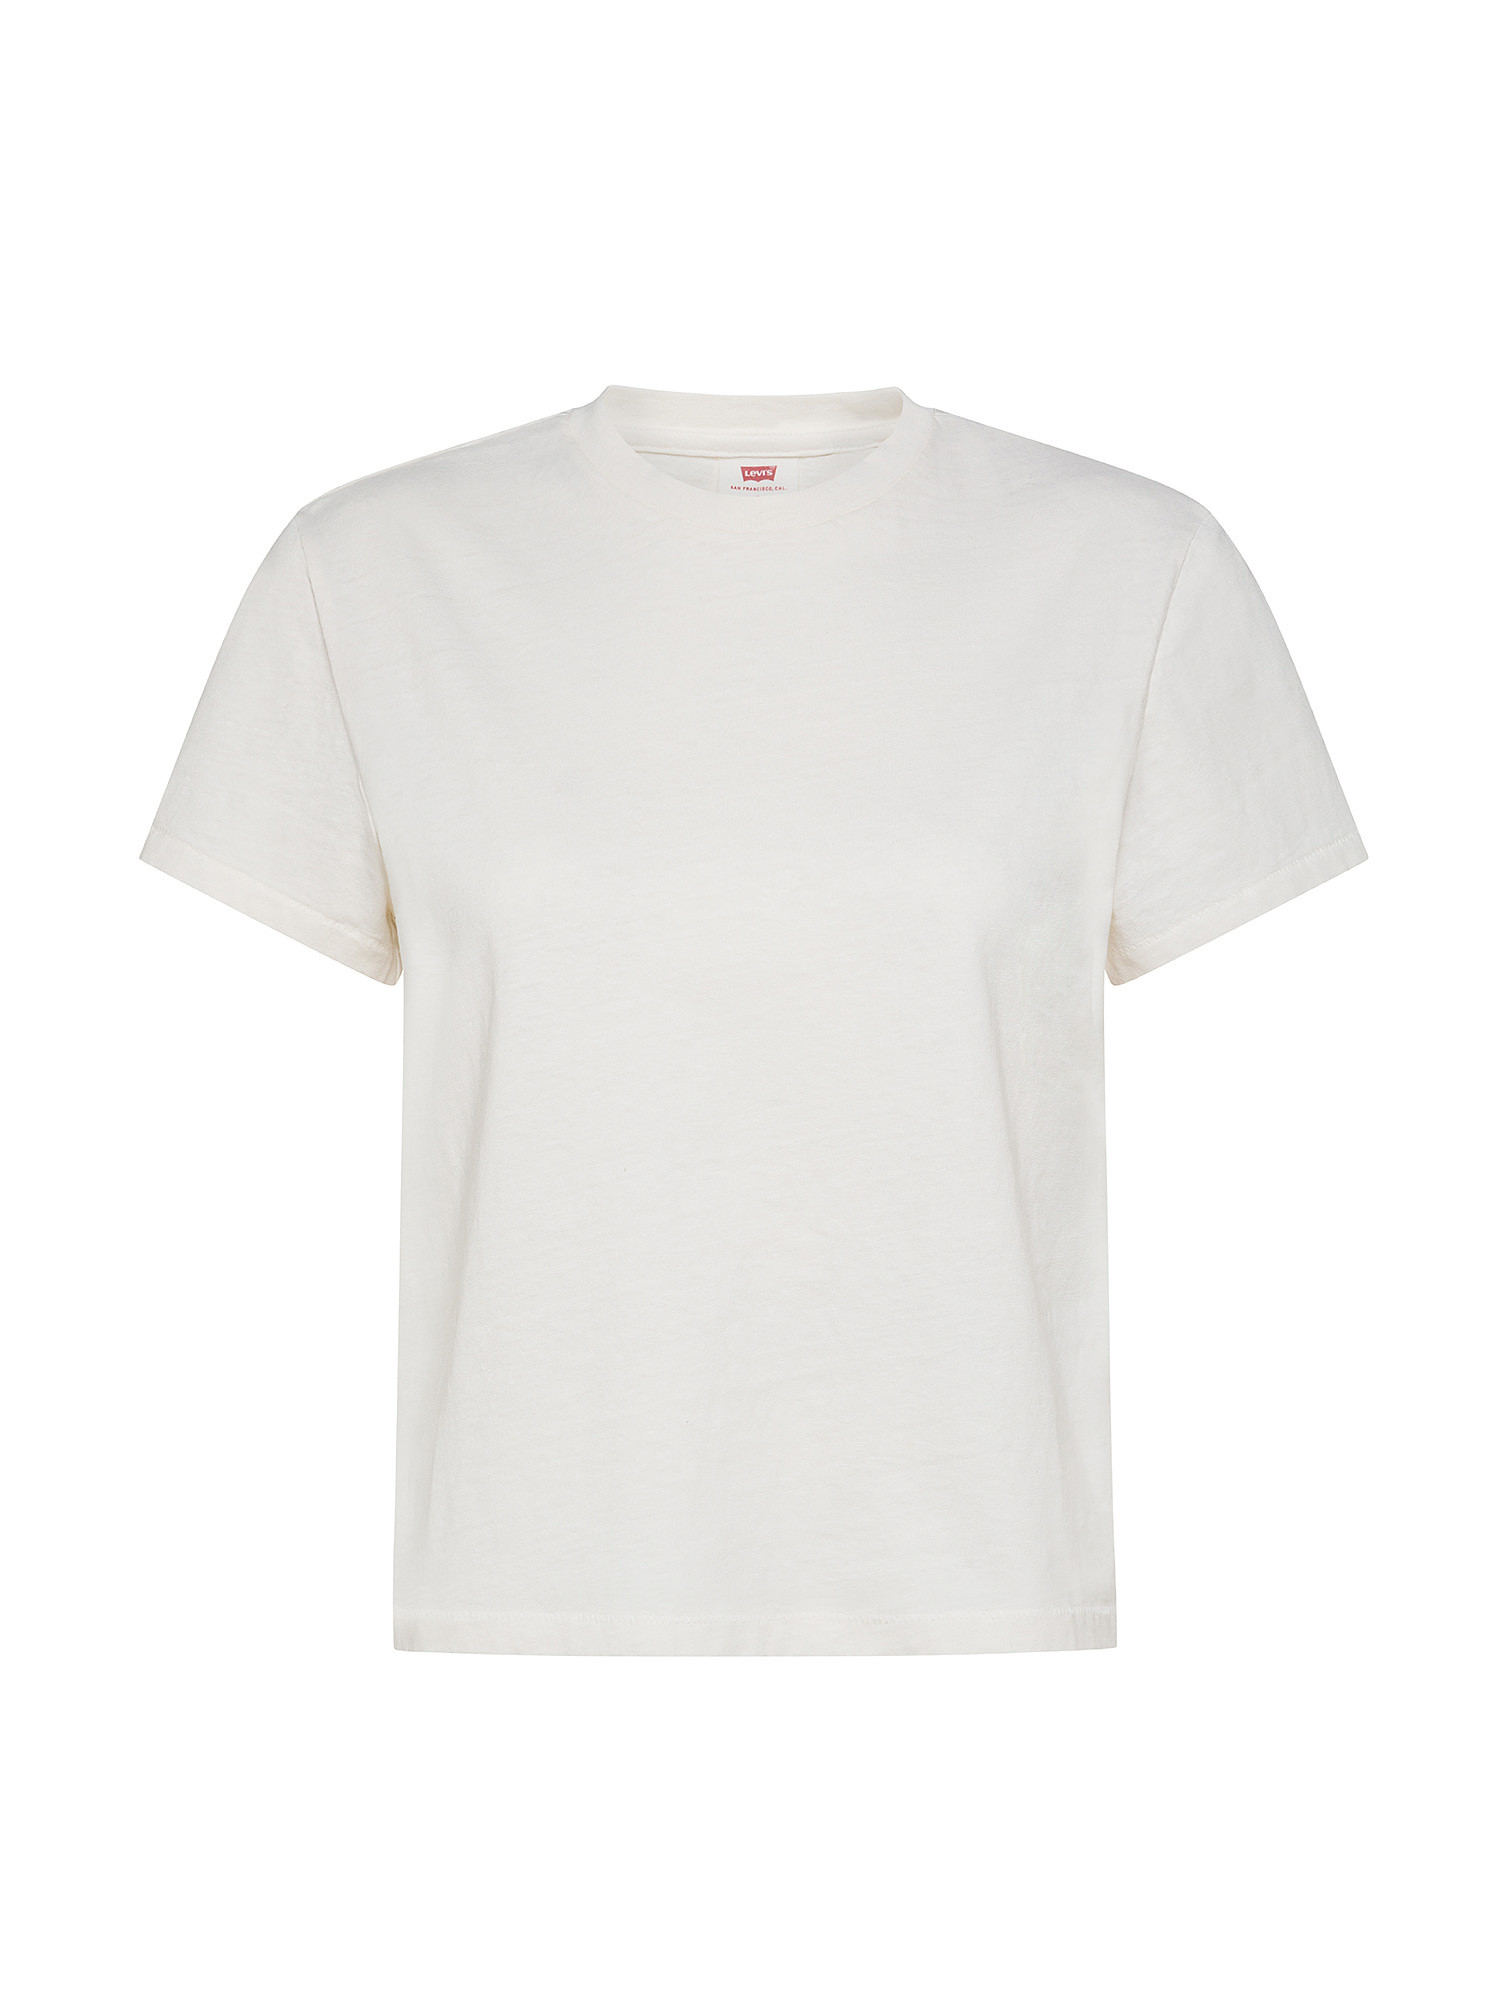 Levi's - classic fit t-shirt, White, large image number 0